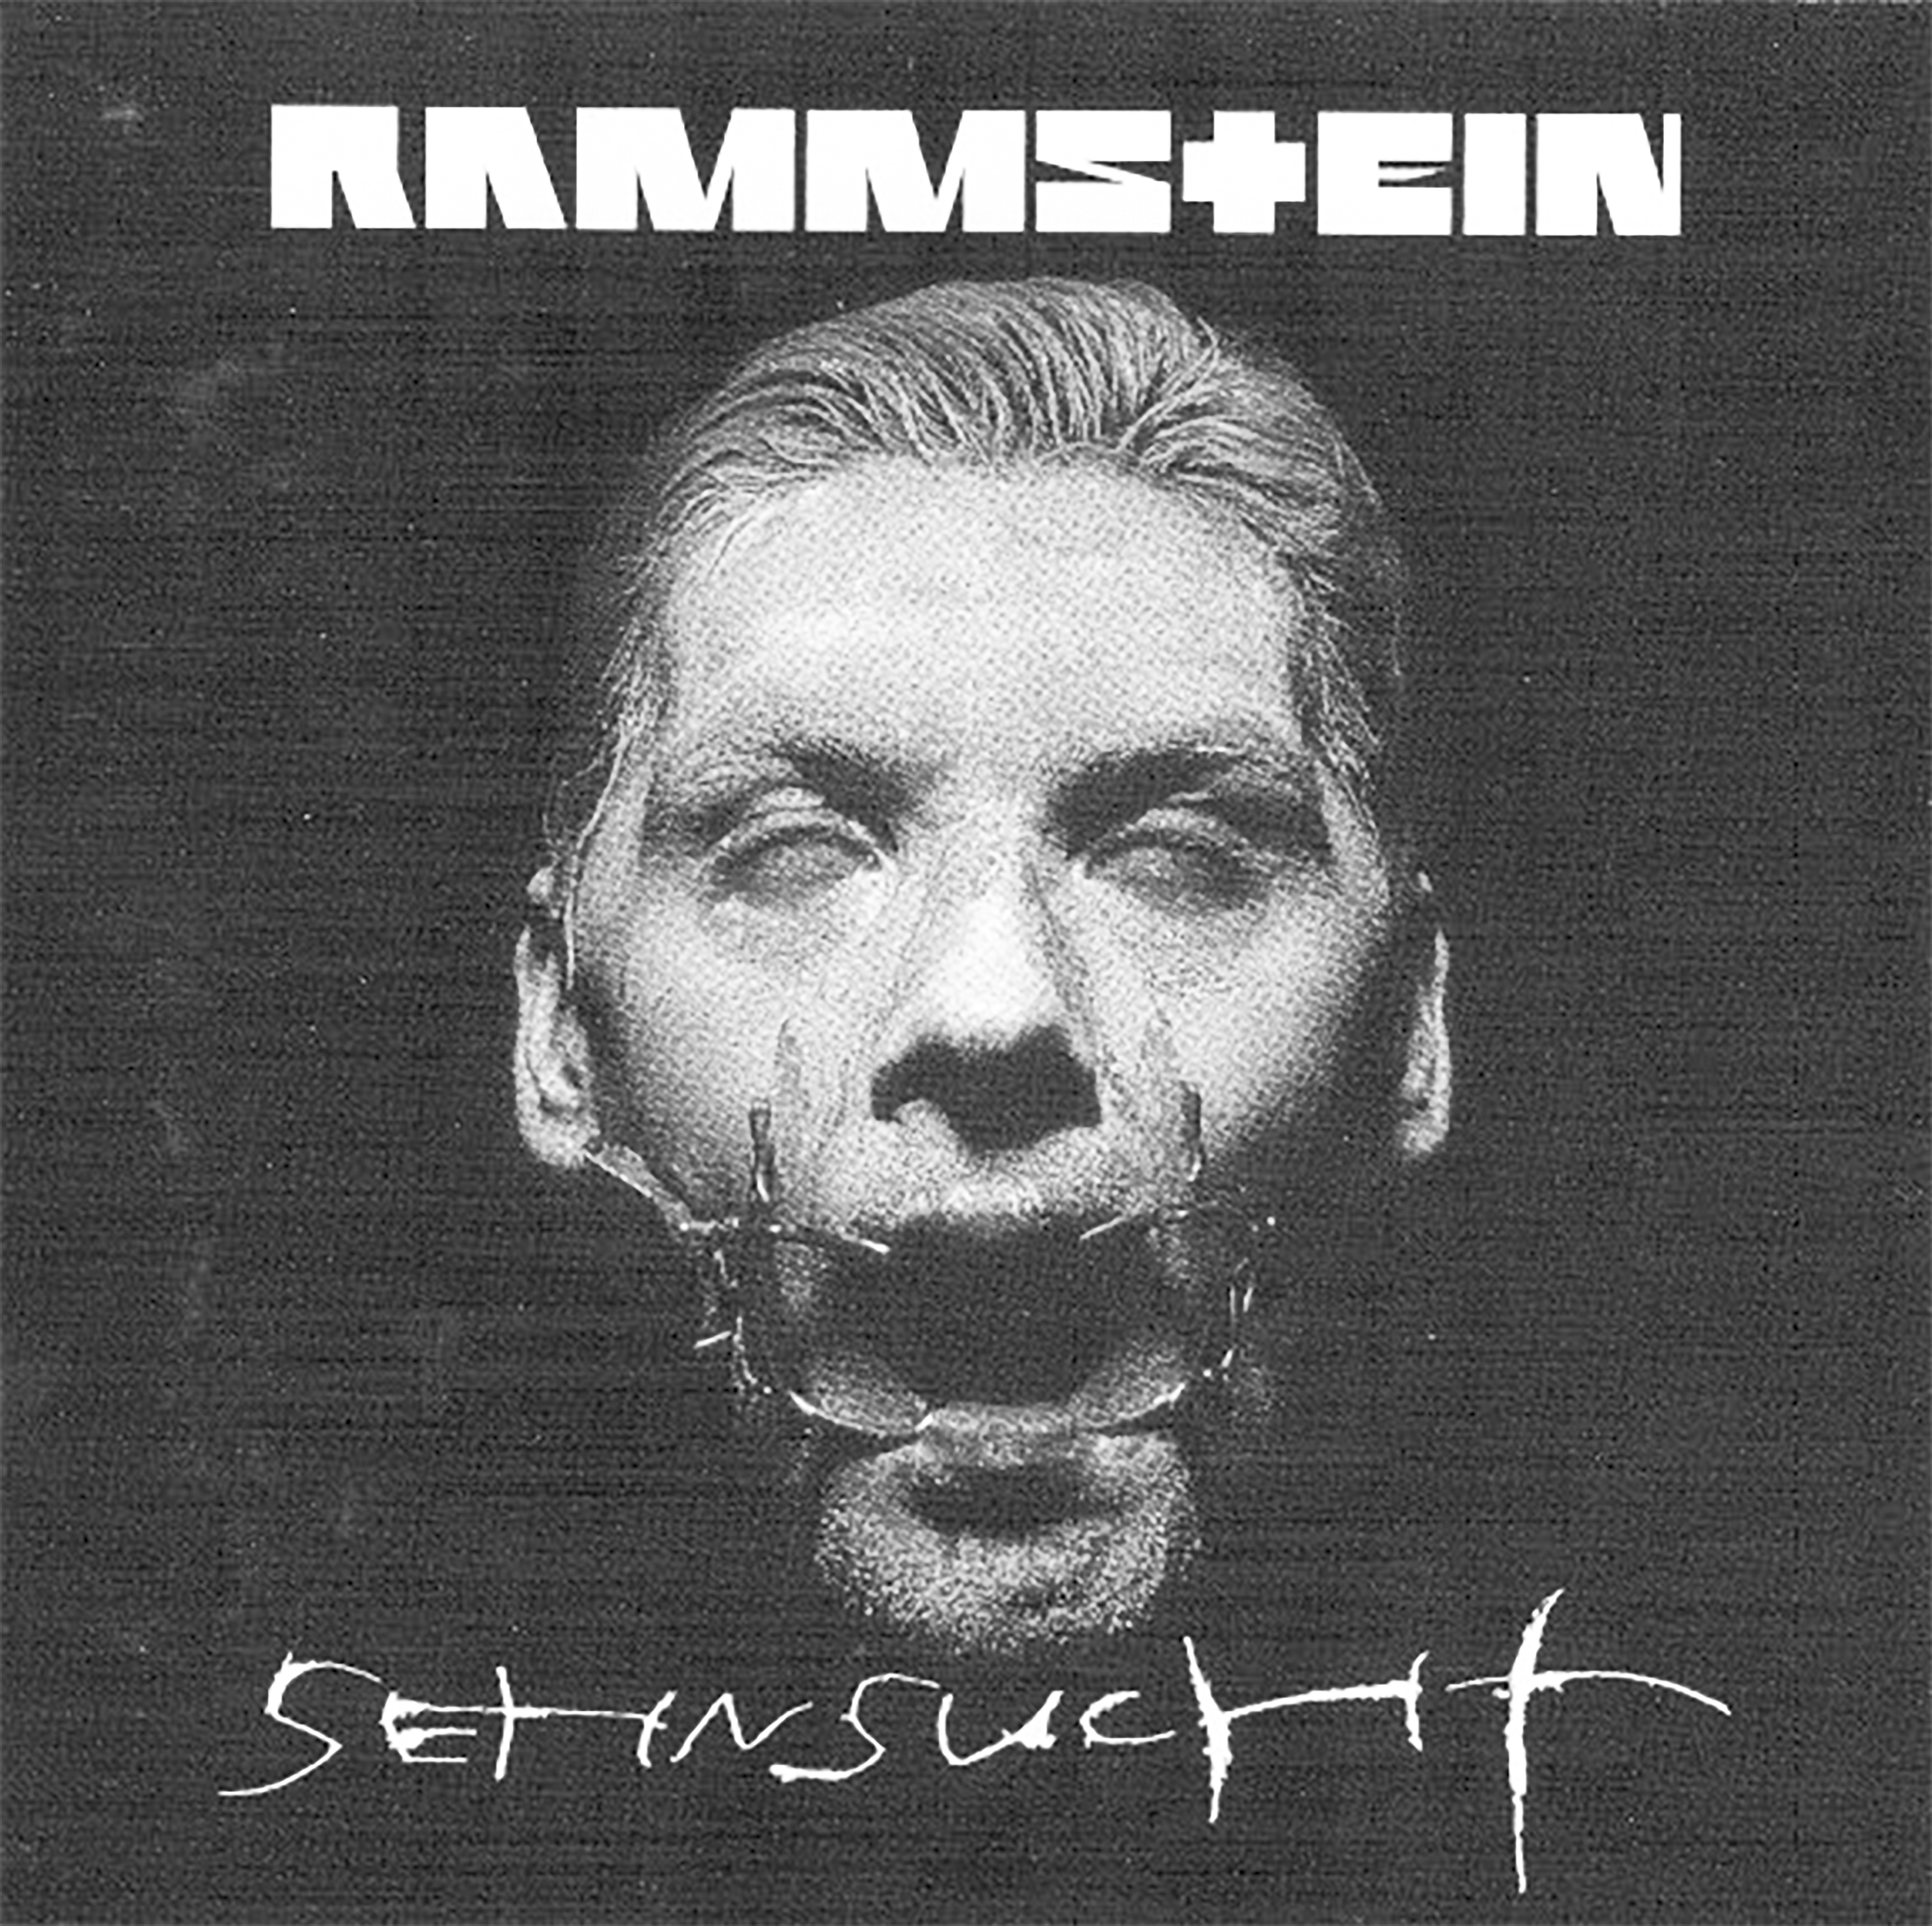 A Week in Album Reviews: The Beauty of Metal – ‘Sehnsucht’ by Rammstein